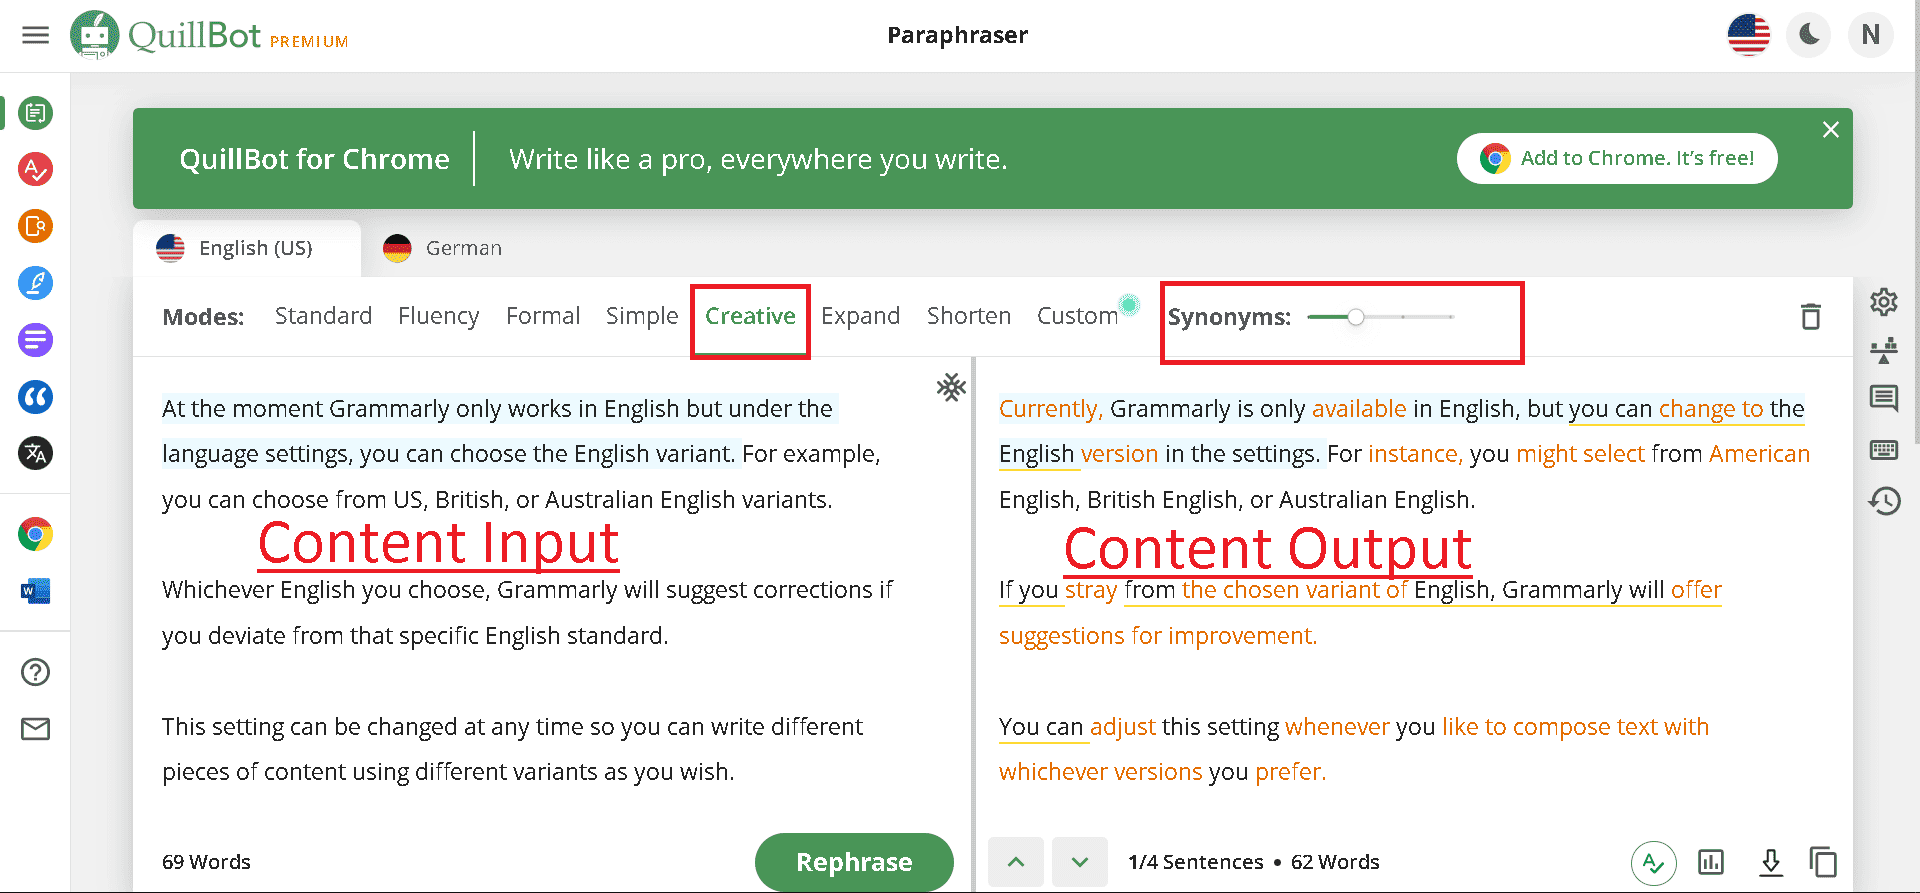 Quillbot Paraphraser app rewriting content in the Creative mode